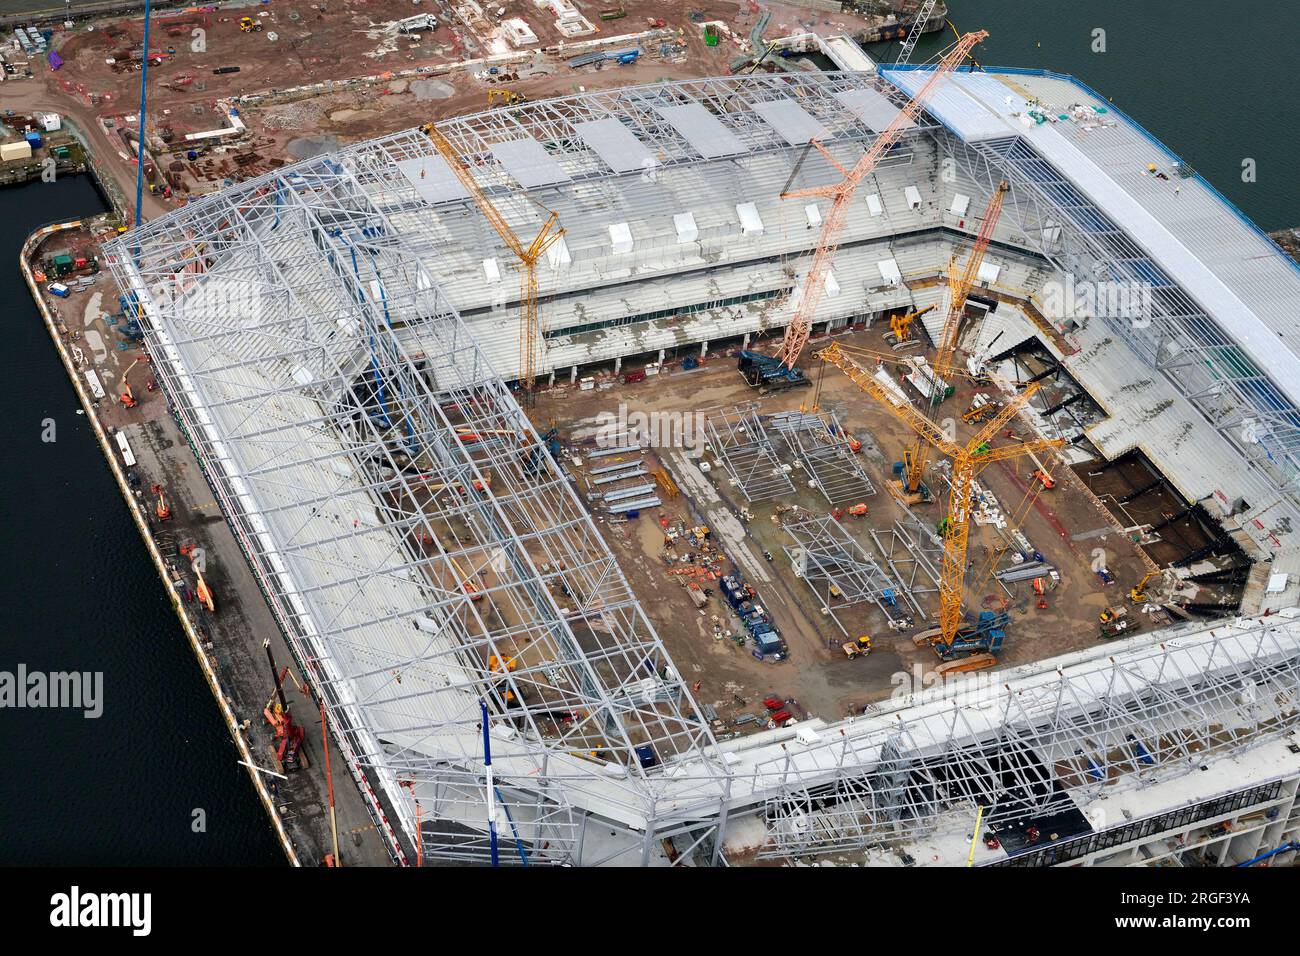 An aerial view of Everton FC new stadium under construction, Bramley-Moore Dock, Merseyside, North West England, UK Stock Photo